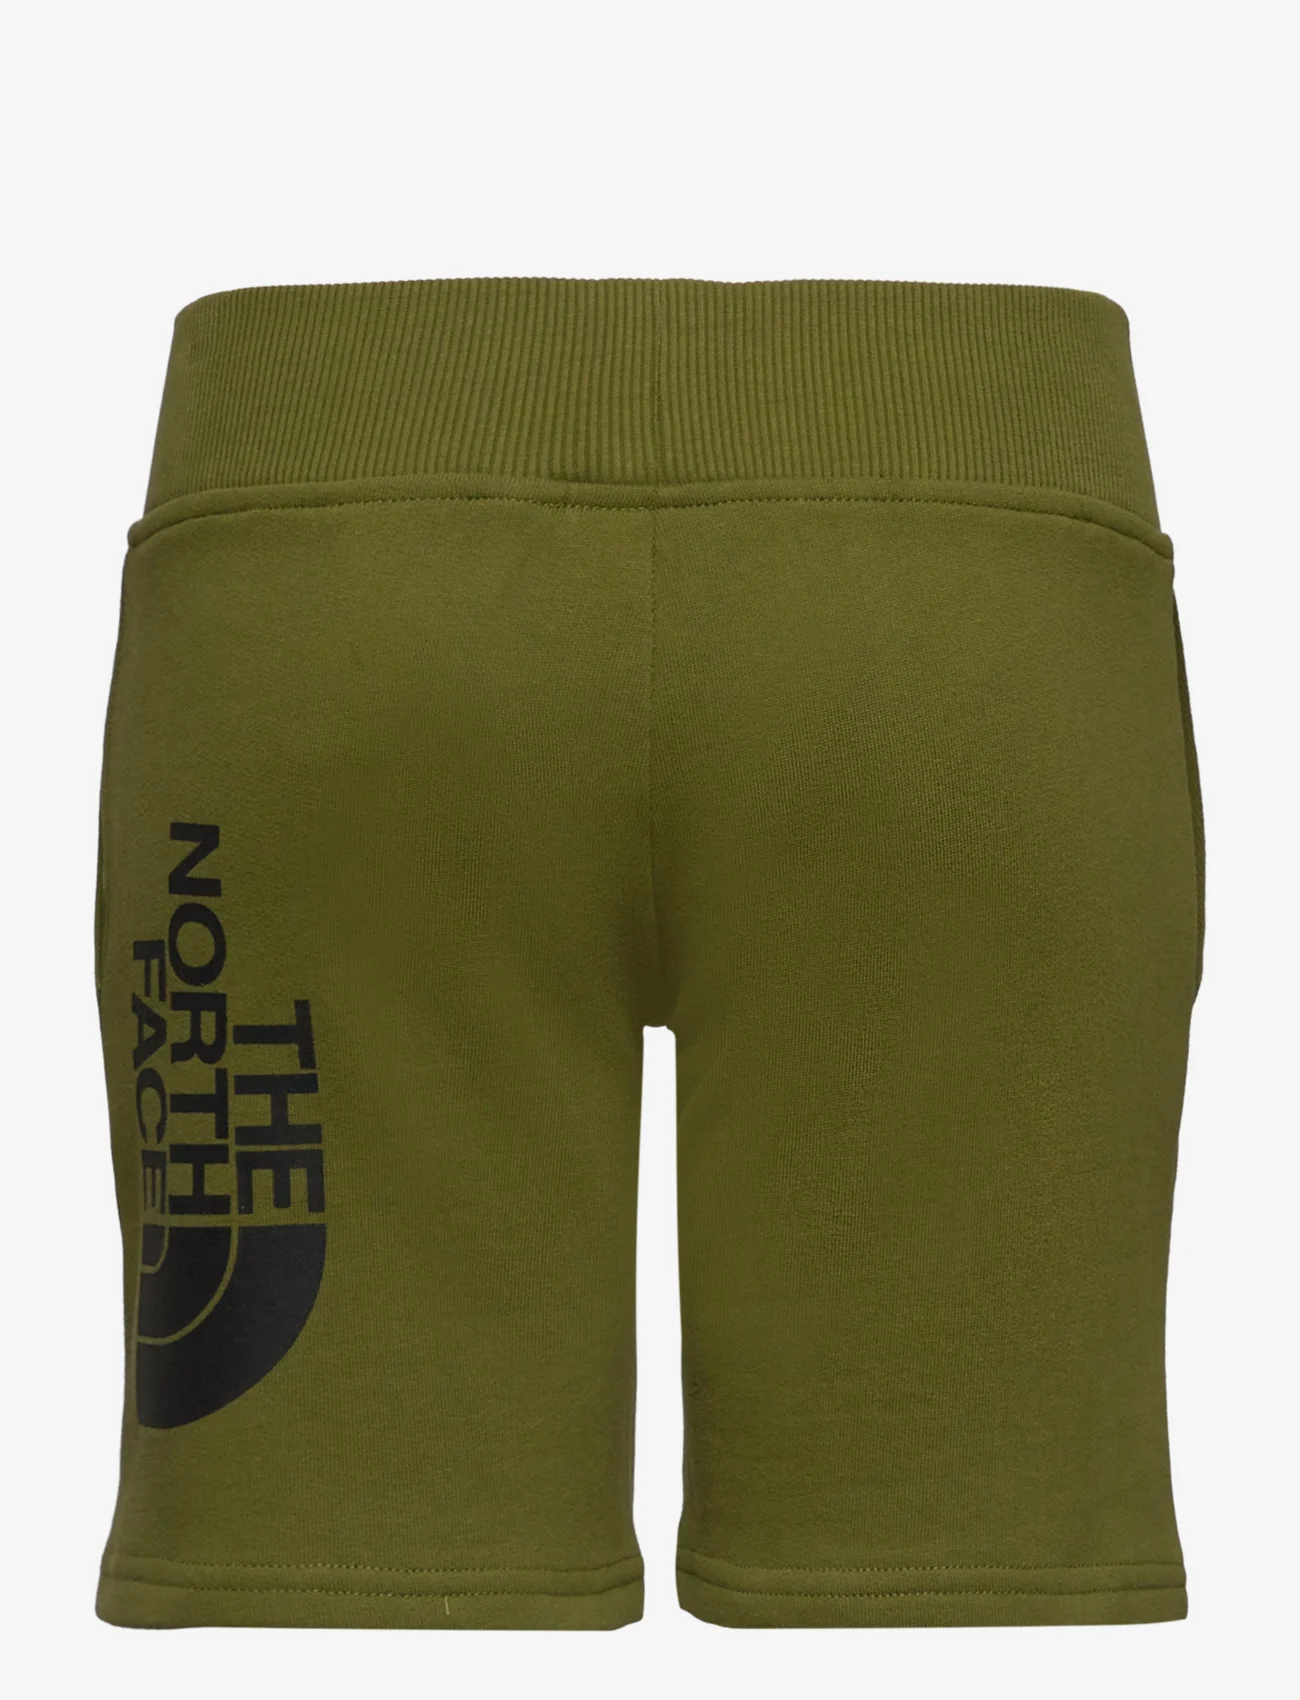 The North Face - B COTTON SHORTS - sweatshorts - forest olive - 1